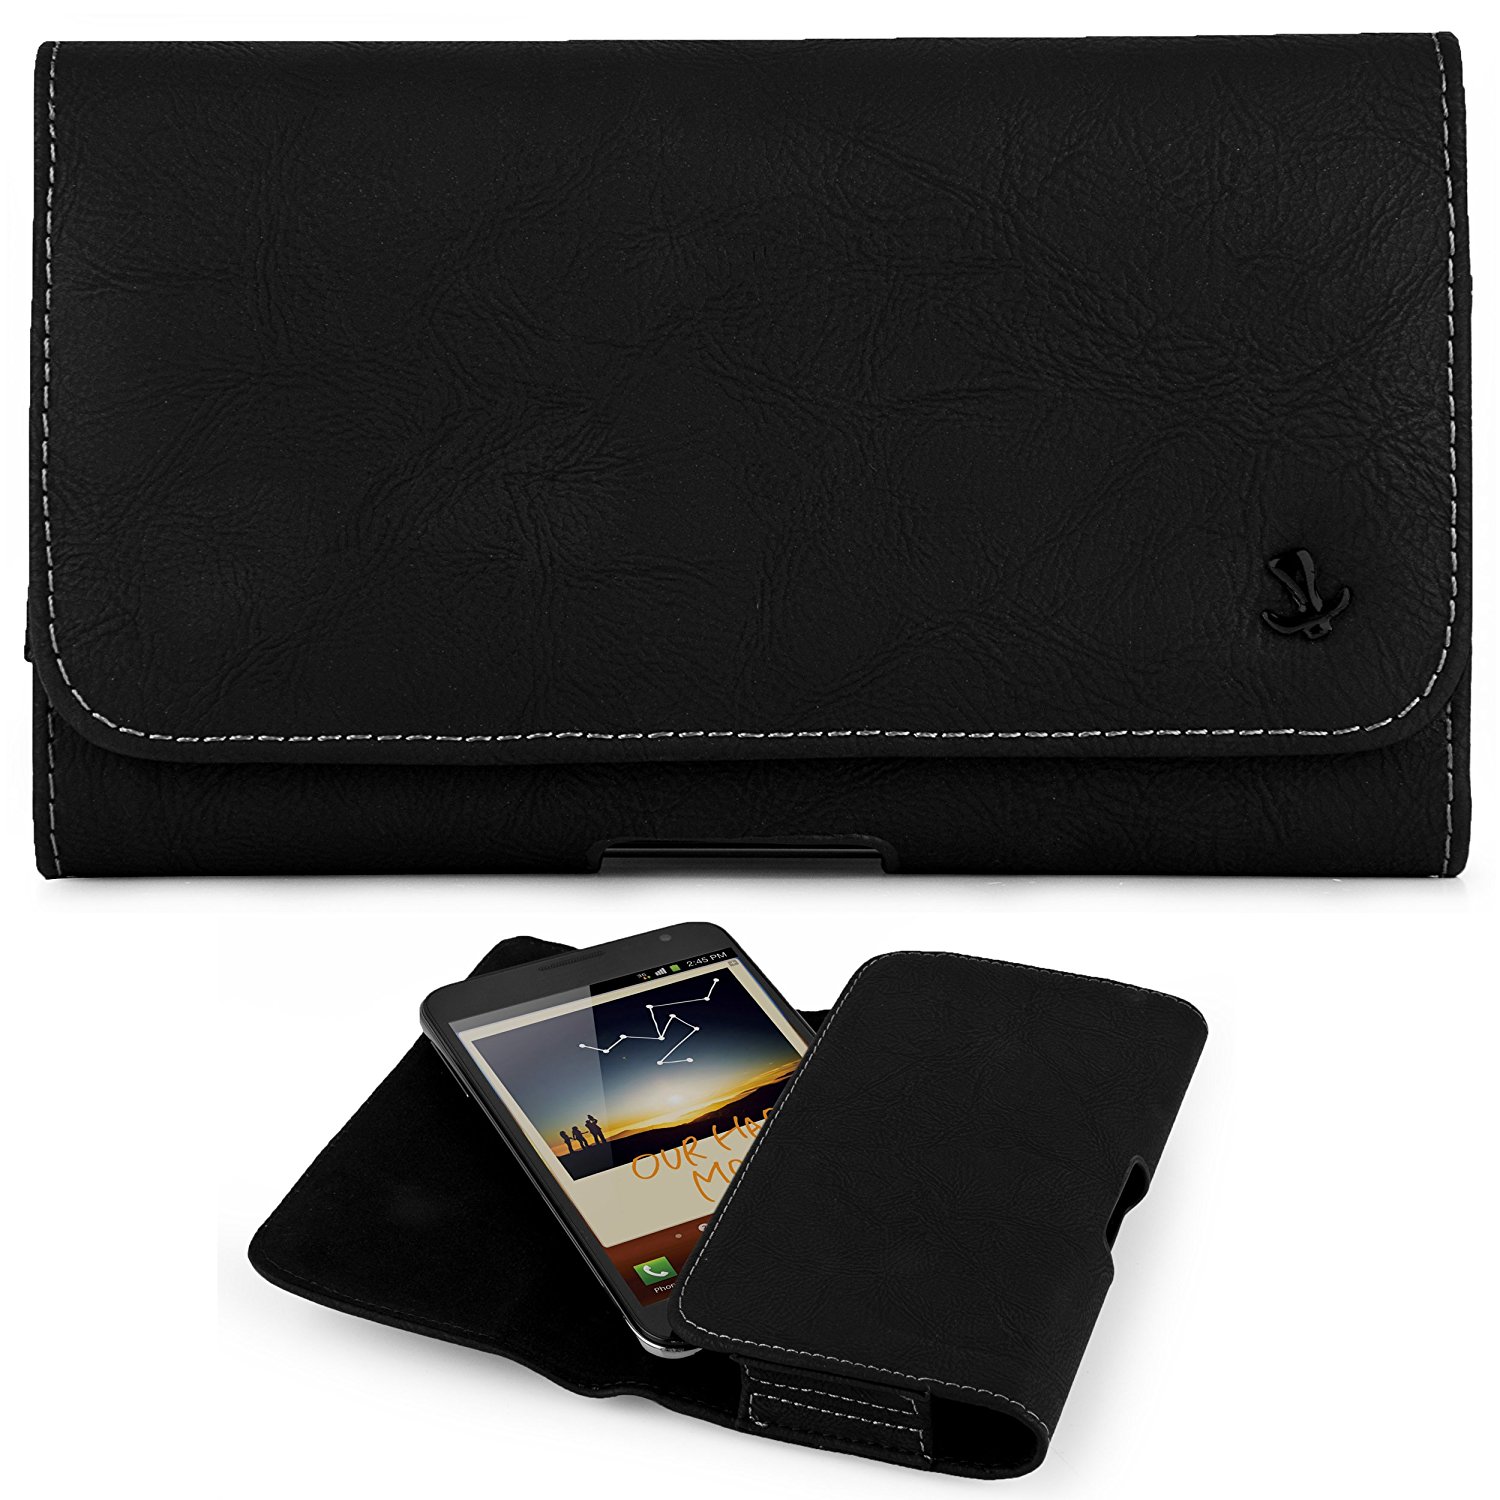 Alcatel Fierce 4 Allura Pop 4 Plus 5056 - EXTRA LARGE Horizontal Leather Pouch Carrying Case Holster Belt Clip Magnetic Closure Fits - Matte Black - image 1 of 4